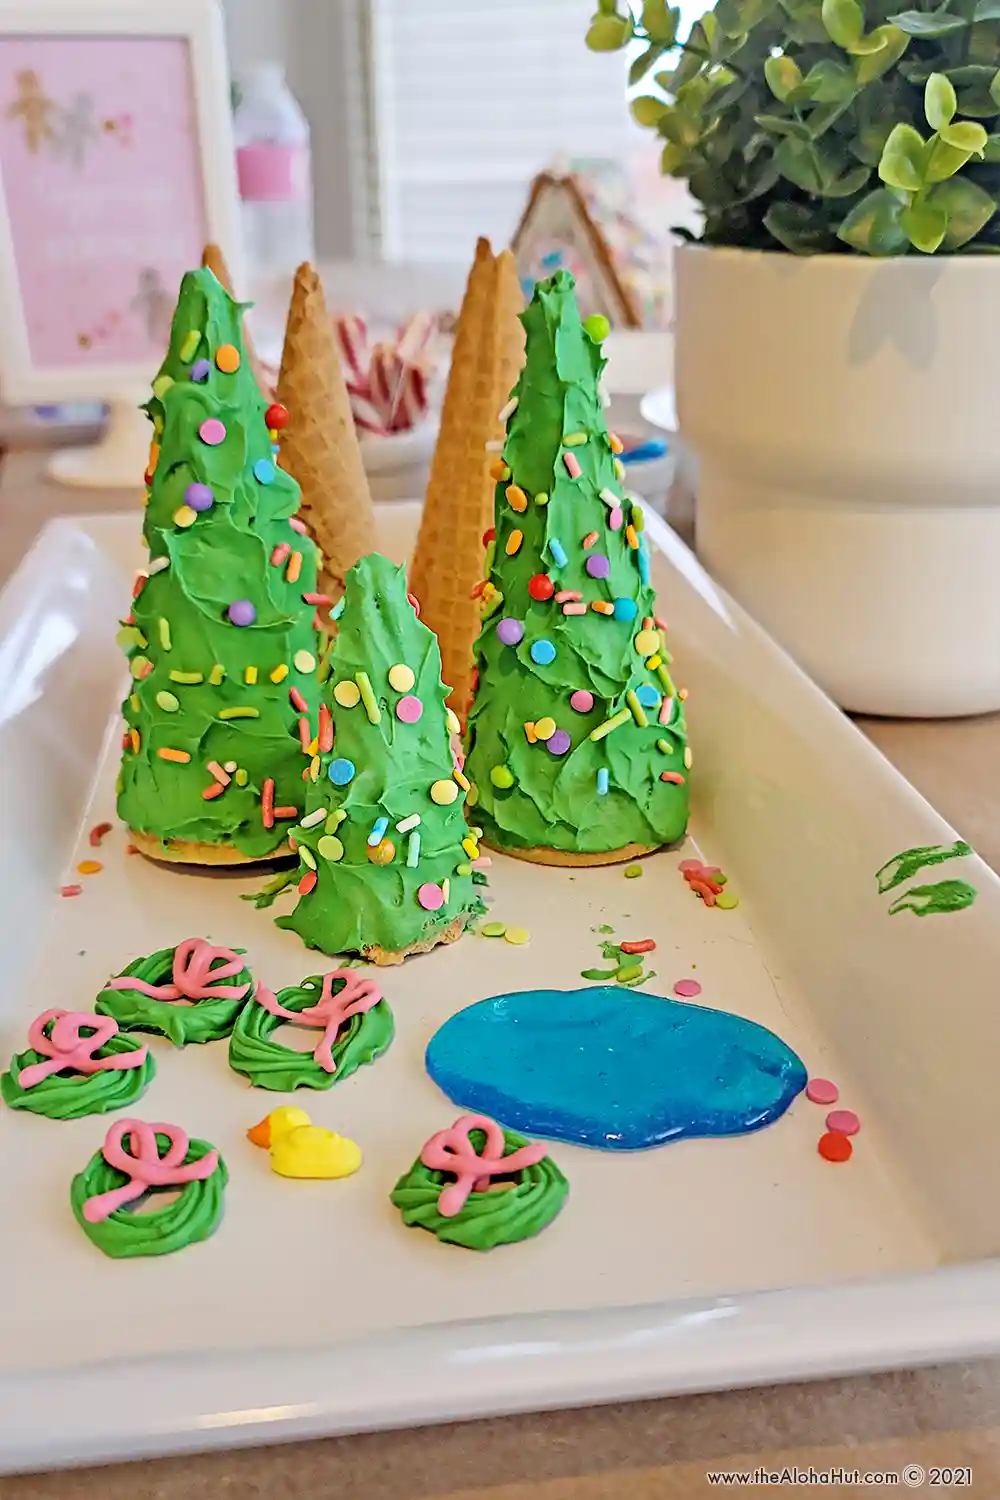 Gingerbread Christmas Party - How to Host - free printable decor - ice cream cone trees, candy ponds, icing wreaths